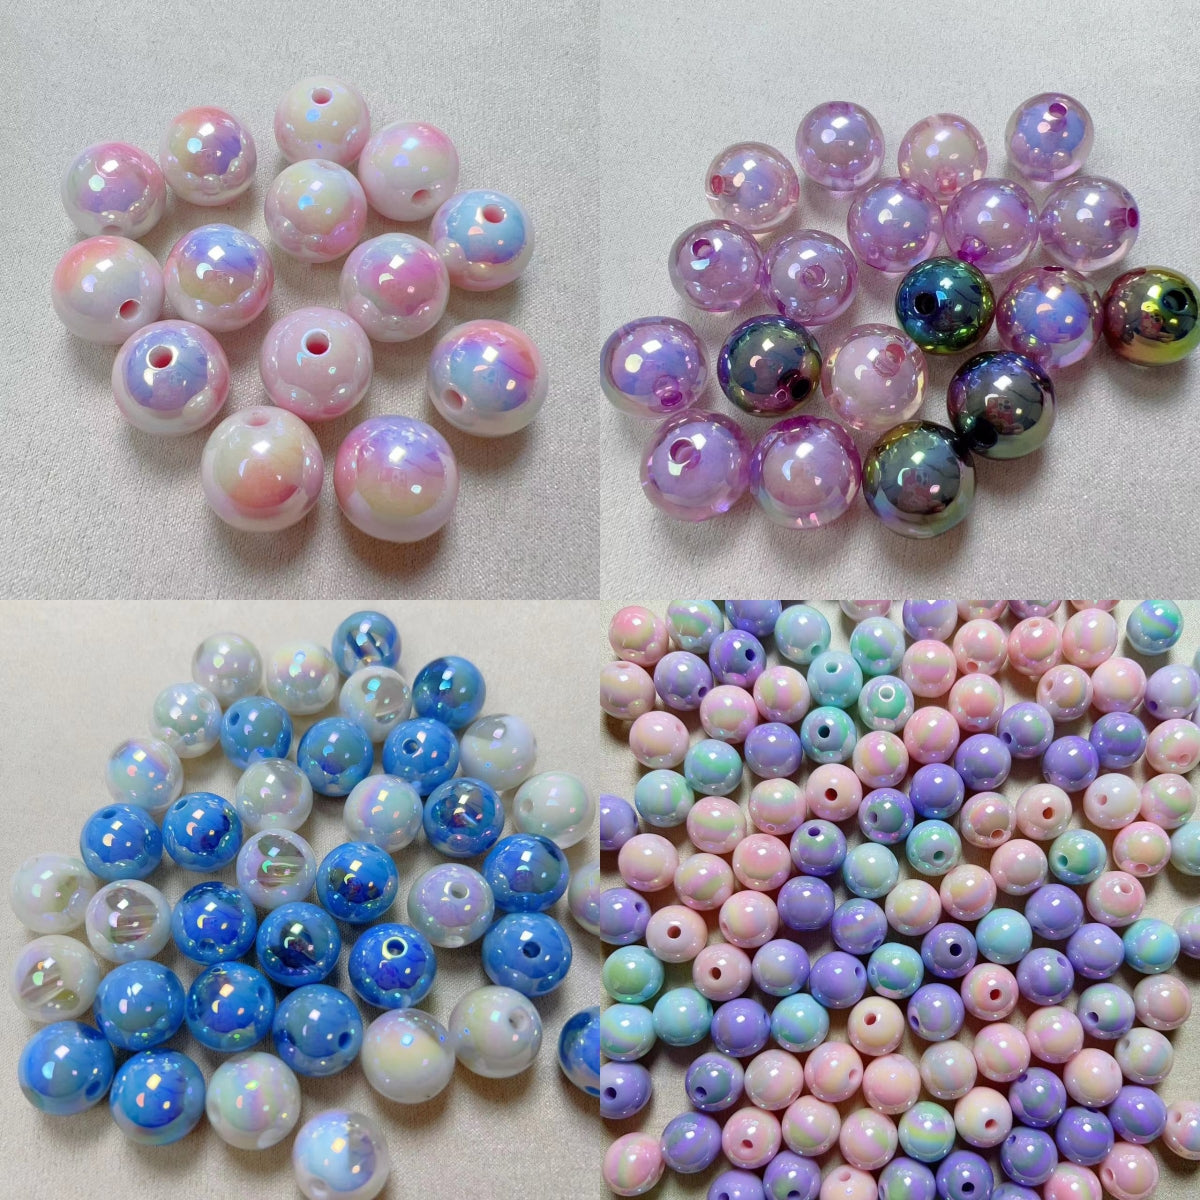 Wholesale Shiny Colorful Resin Beads For DIY,Phone Chain, Bracelet